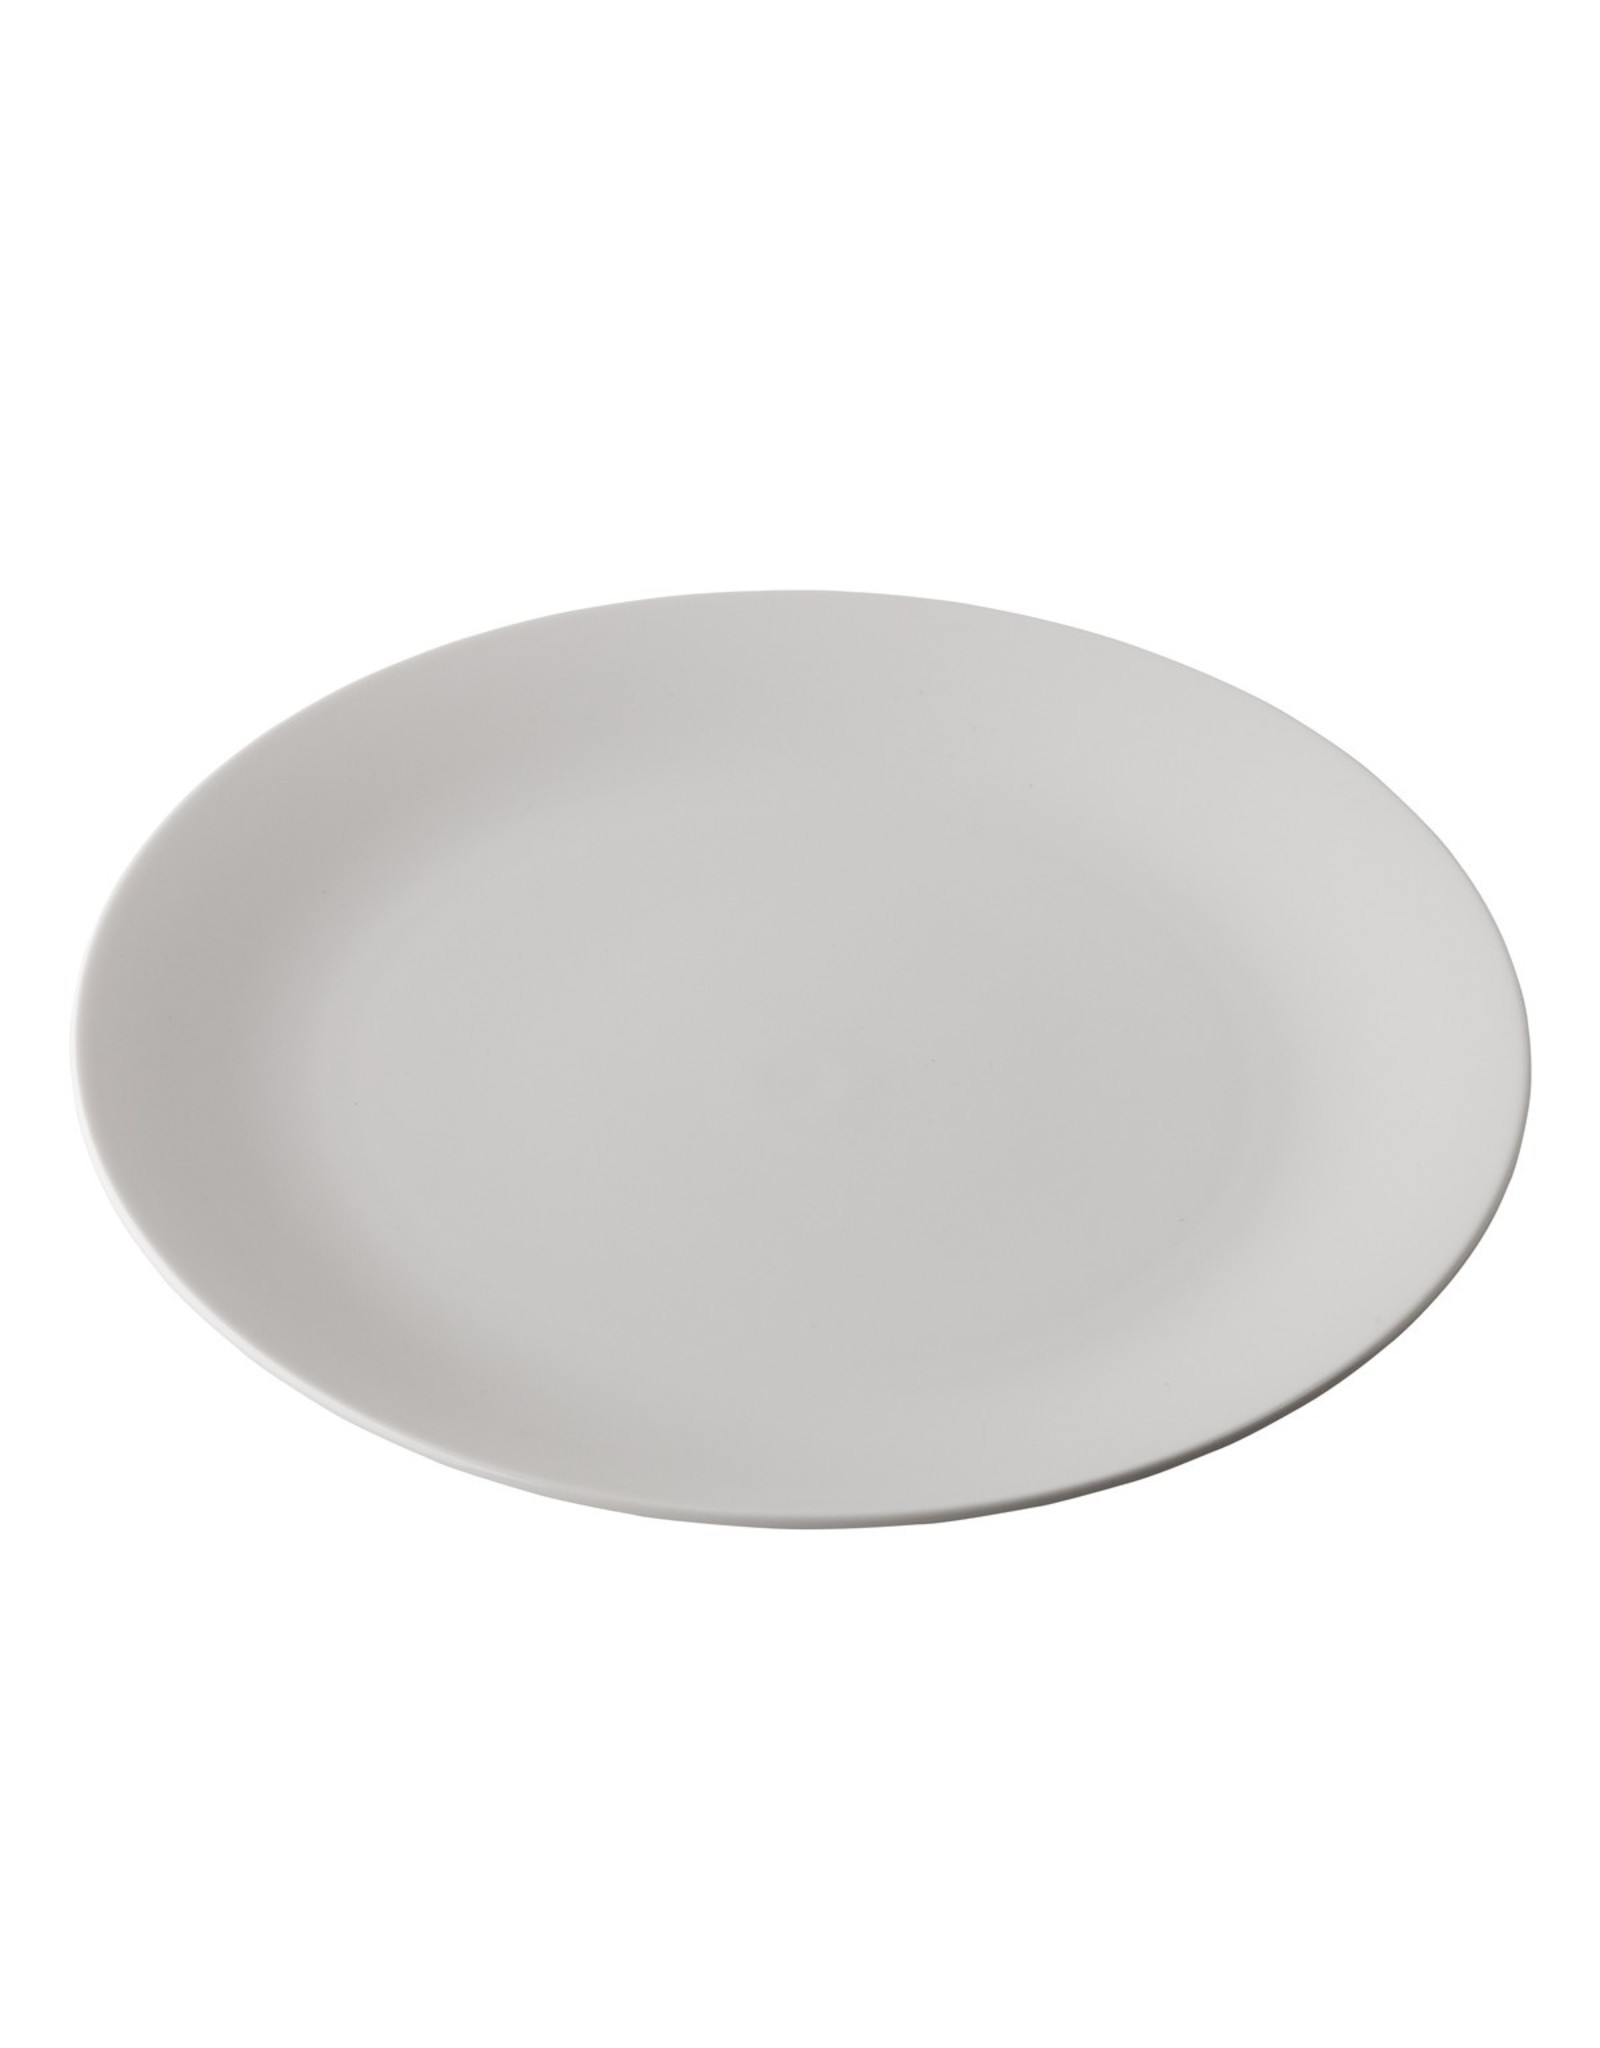 Stylepoint St. James Coupe plate 26 cm